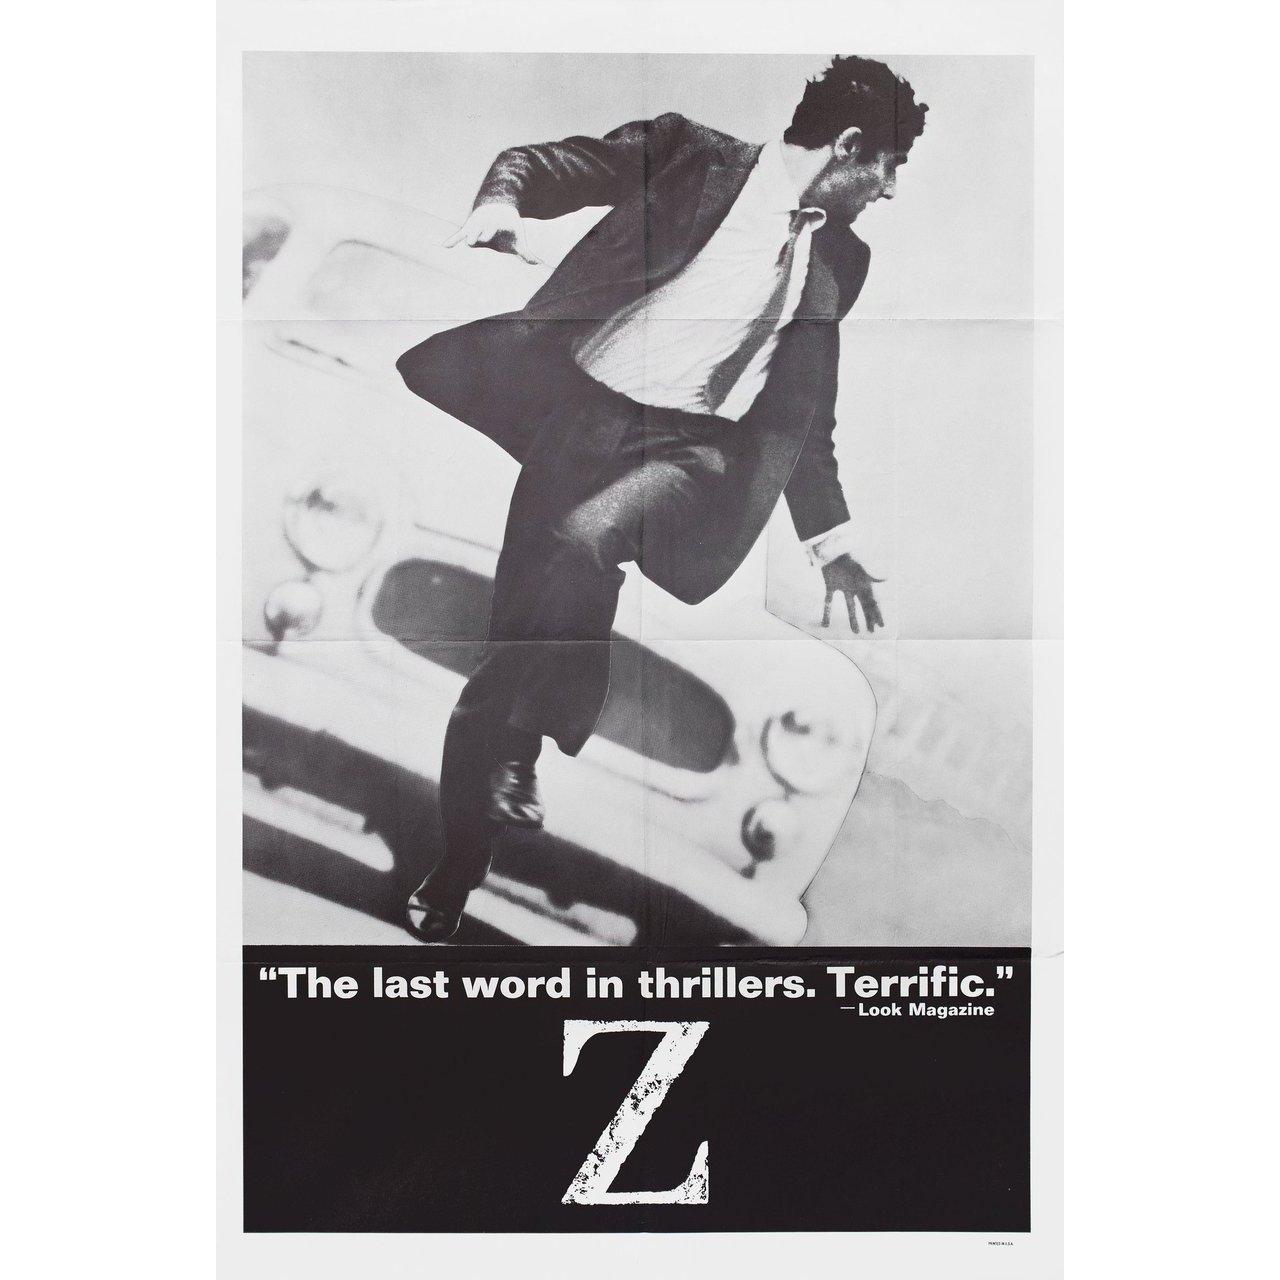 Original 1969 U.S. one sheet poster for the film Z directed by Costa-Gavras with Yves Montand / Irene Papas / Jean-Louis Trintignant / Jacques Perrin. Fine condition, folded. Many original posters were issued folded or were subsequently folded.